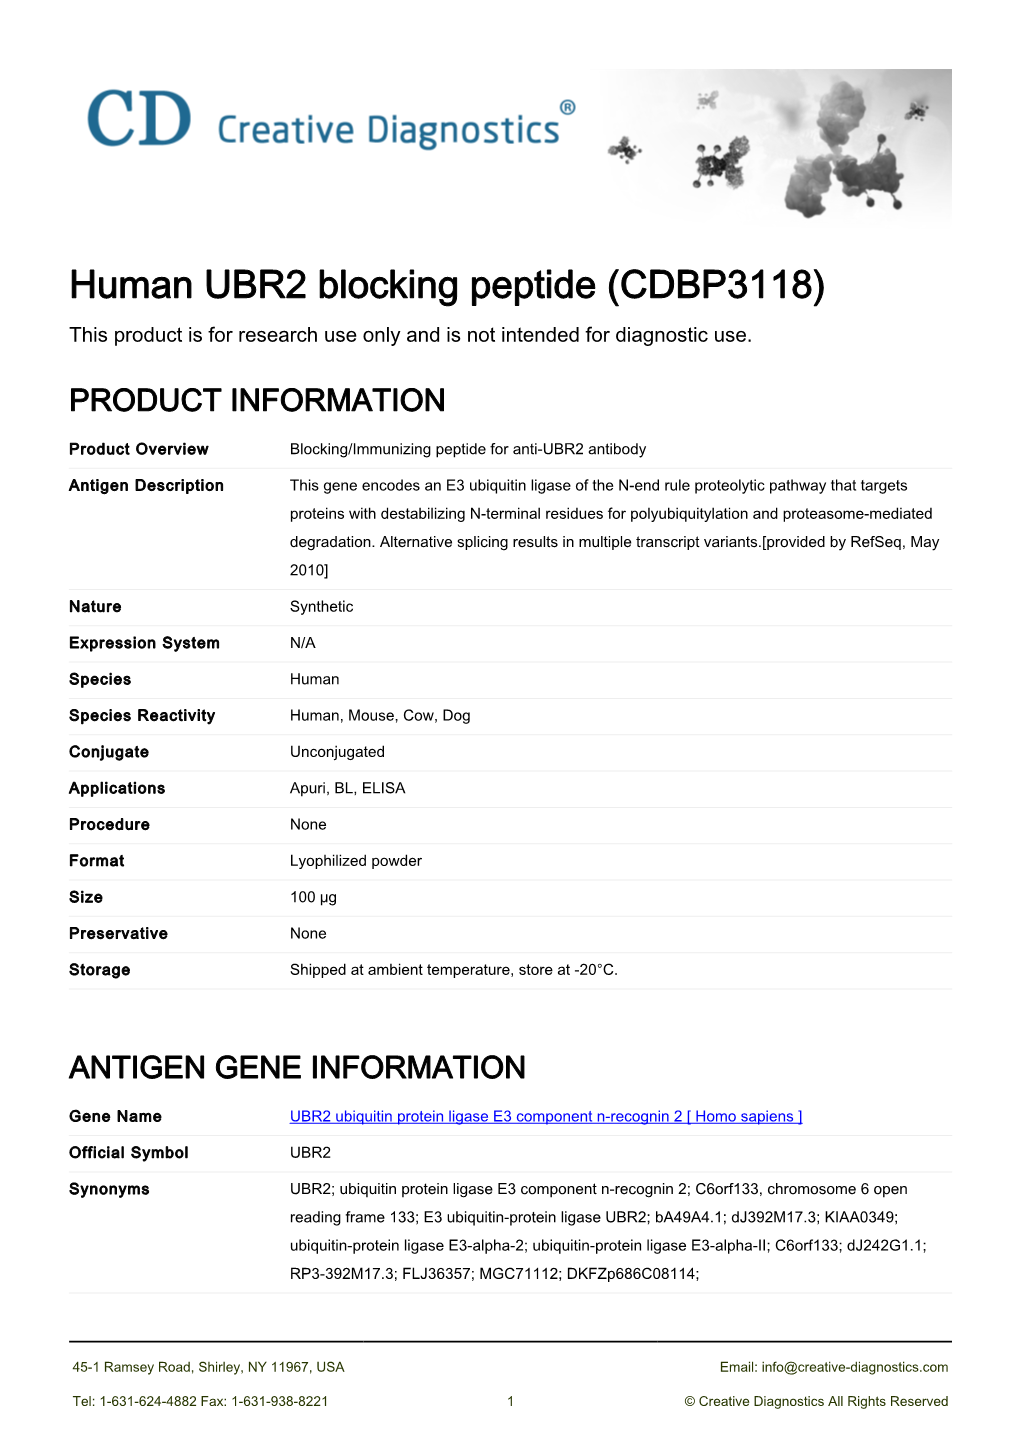 Human UBR2 Blocking Peptide (CDBP3118) This Product Is for Research Use Only and Is Not Intended for Diagnostic Use